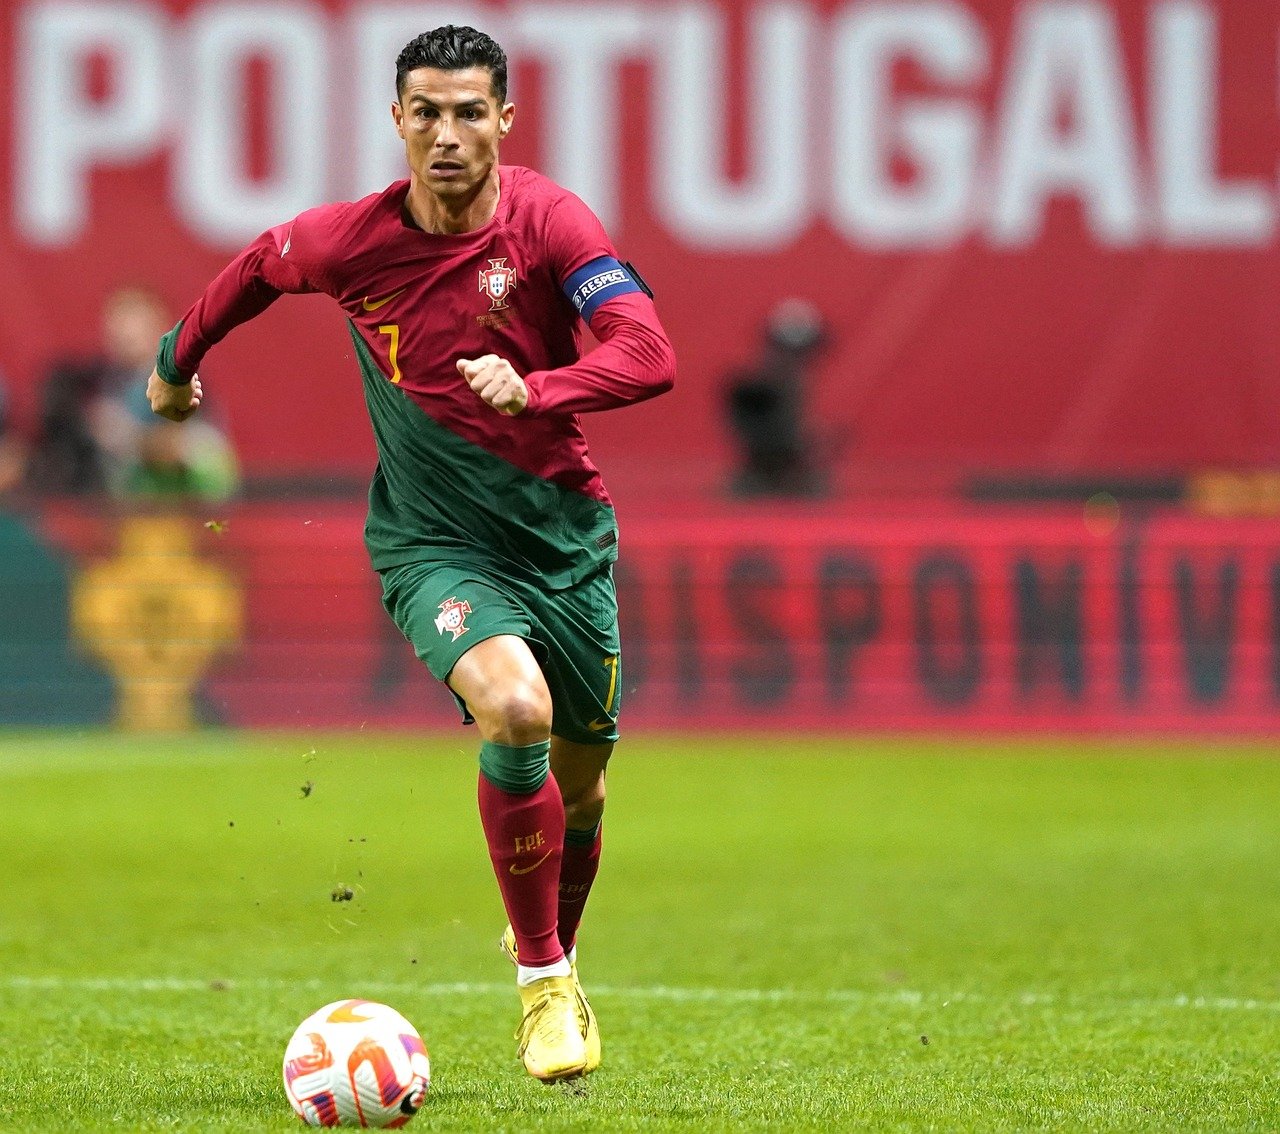 Soccer Superstar Cristiano Ronaldo Sued for Promoting Binance Crypto Exchange – Here’s the Latest